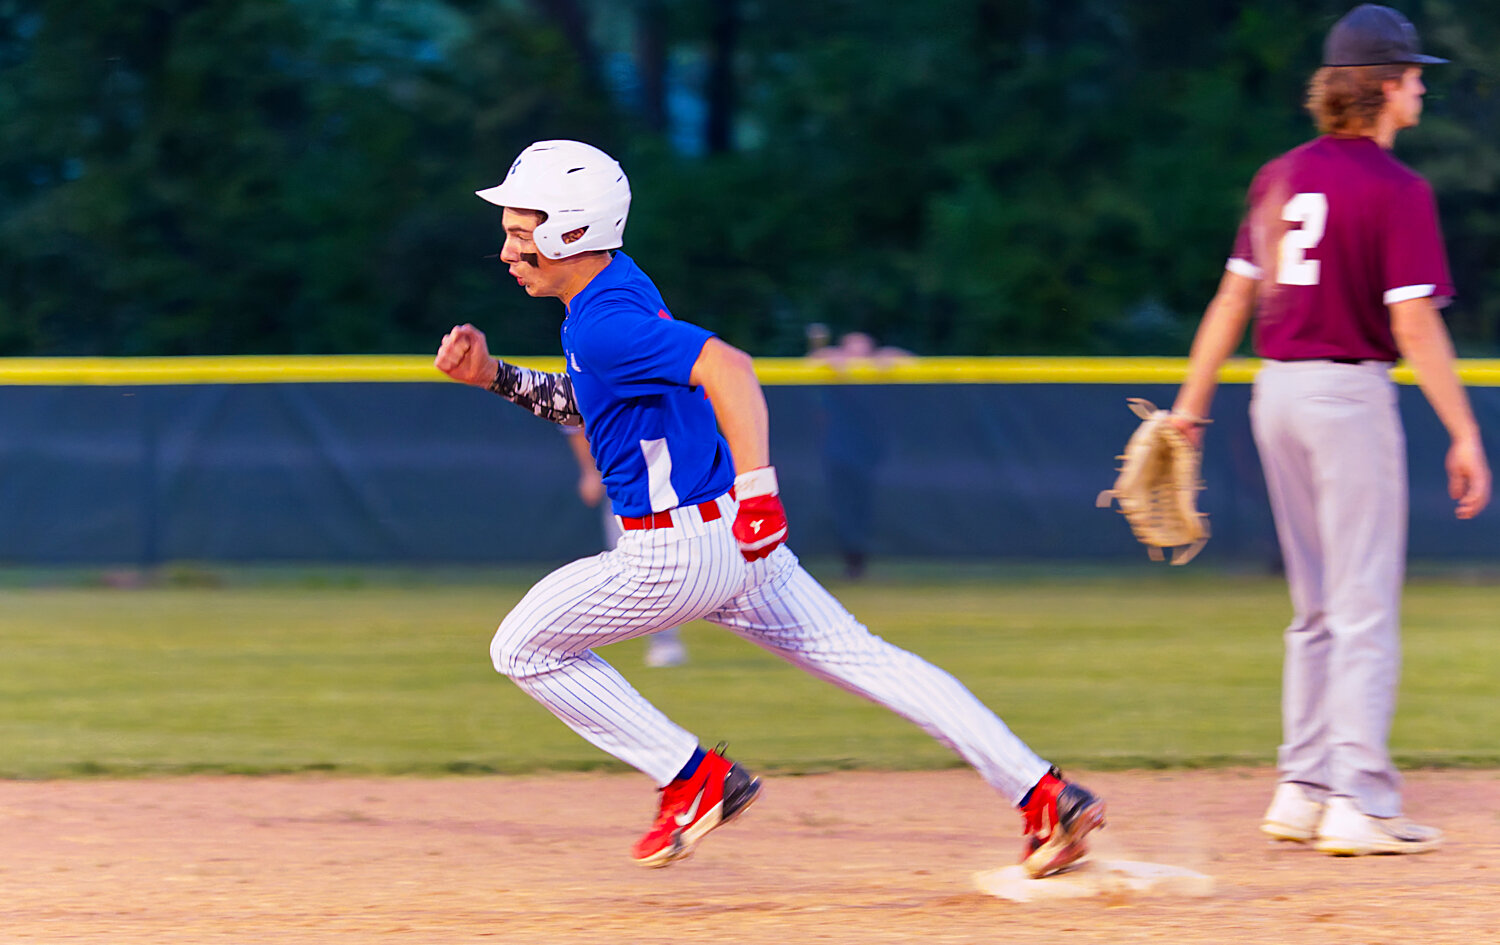 Michael Lacy speeds around second base. [preview further panther photos]